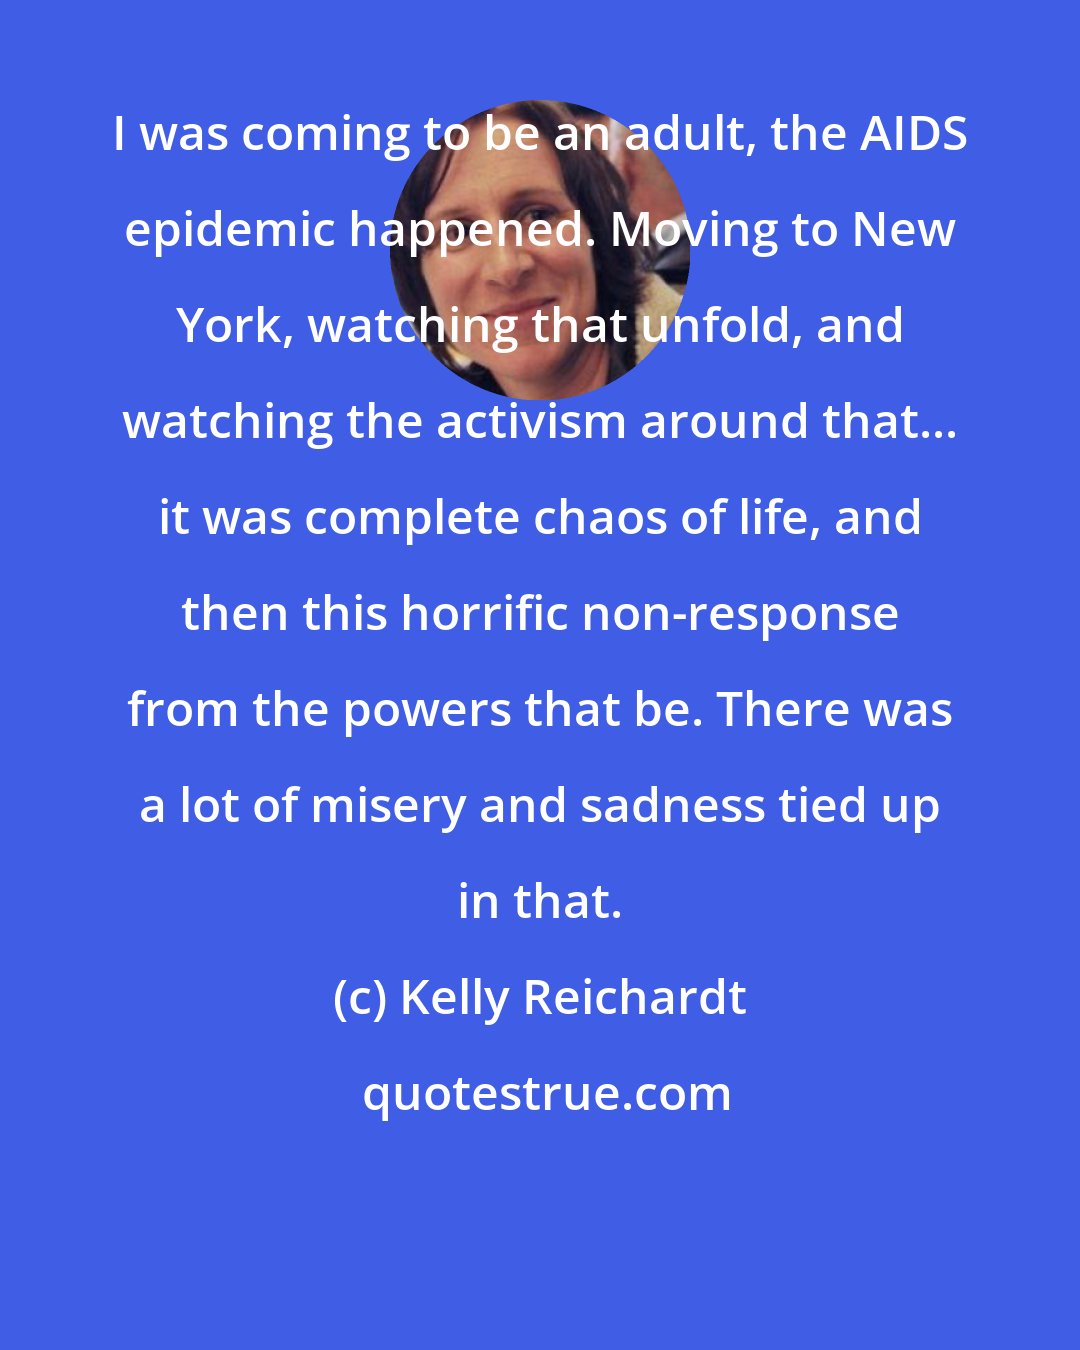 Kelly Reichardt: I was coming to be an adult, the AIDS epidemic happened. Moving to New York, watching that unfold, and watching the activism around that... it was complete chaos of life, and then this horrific non-response from the powers that be. There was a lot of misery and sadness tied up in that.